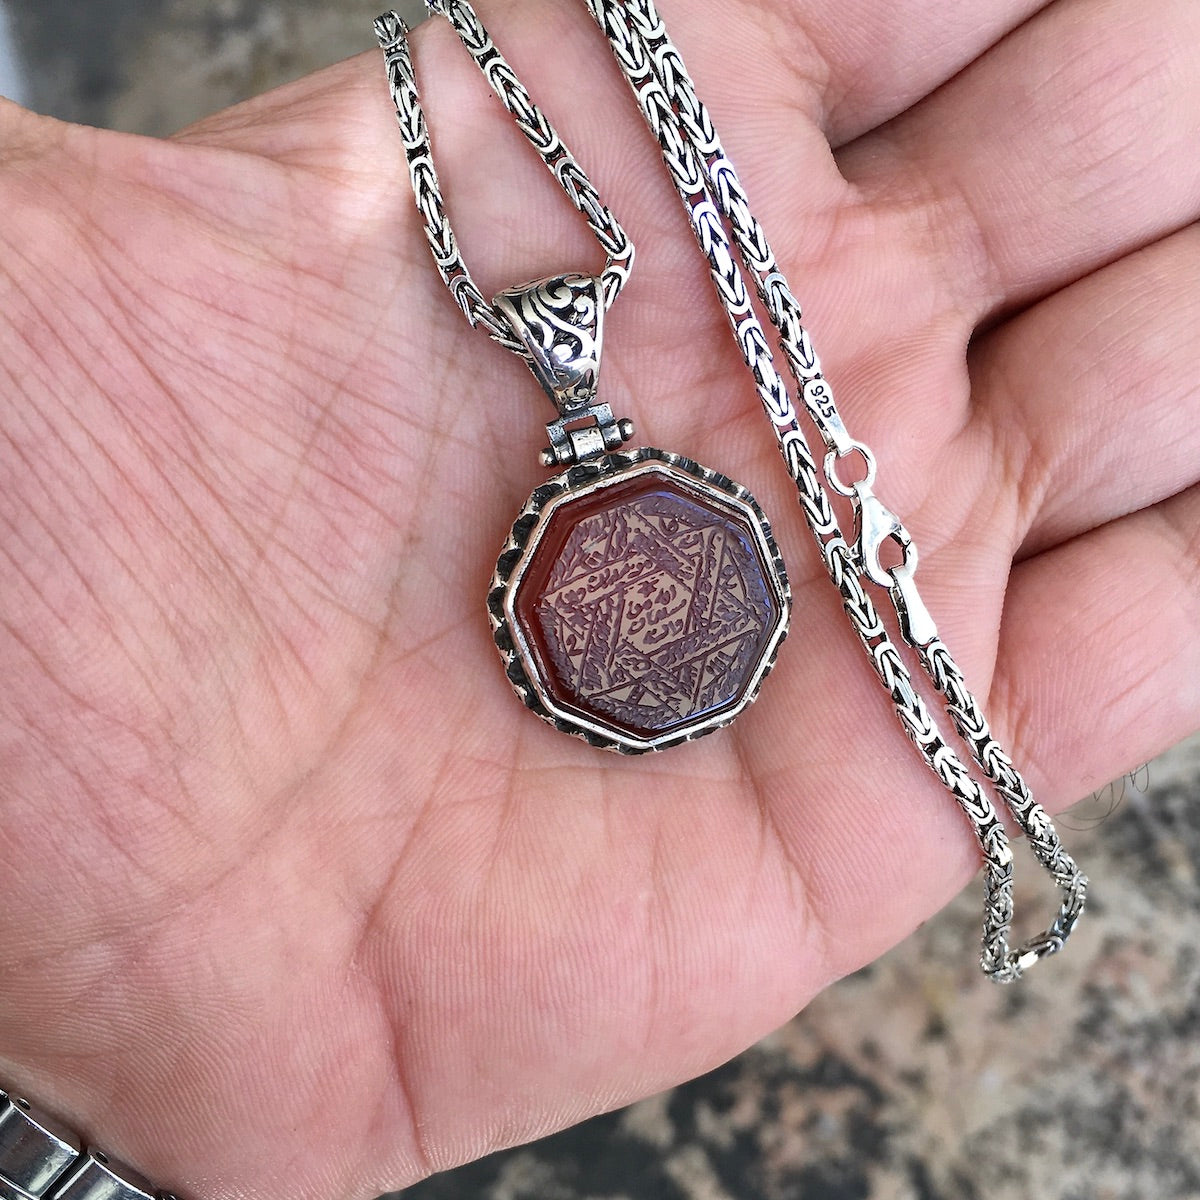 Agate Pendant Handmade 925 Sterling Silver Seal of Solomon engraved Talisman incl. Kings Chain Necklace